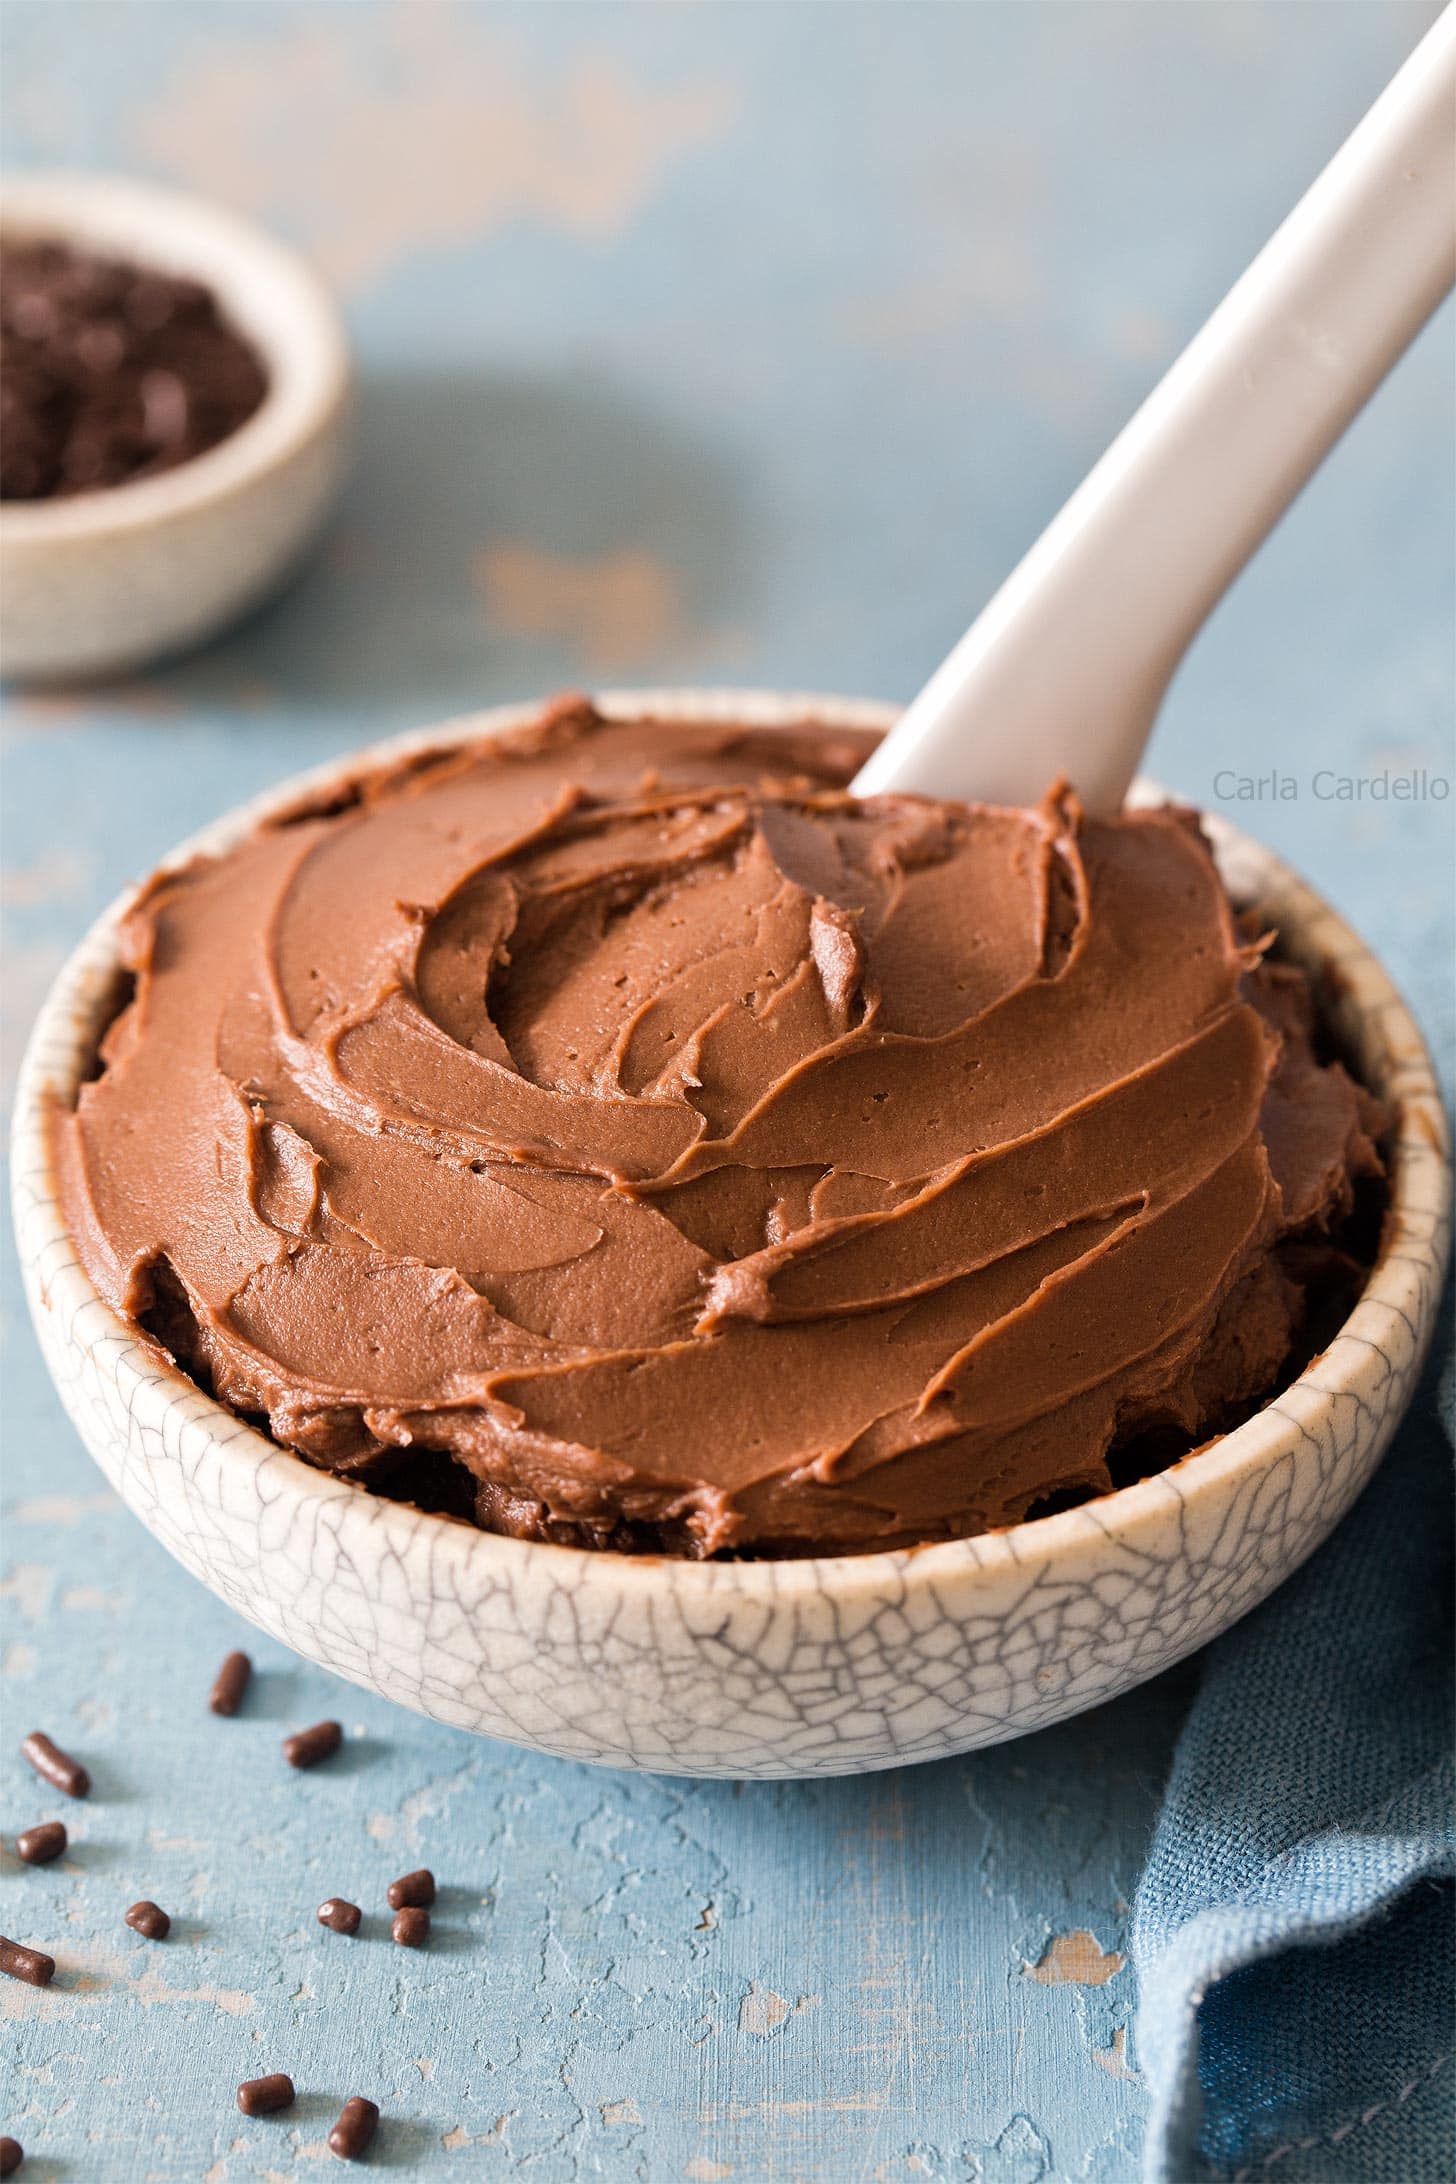 Chocolate cream cheese frosting in a bowl